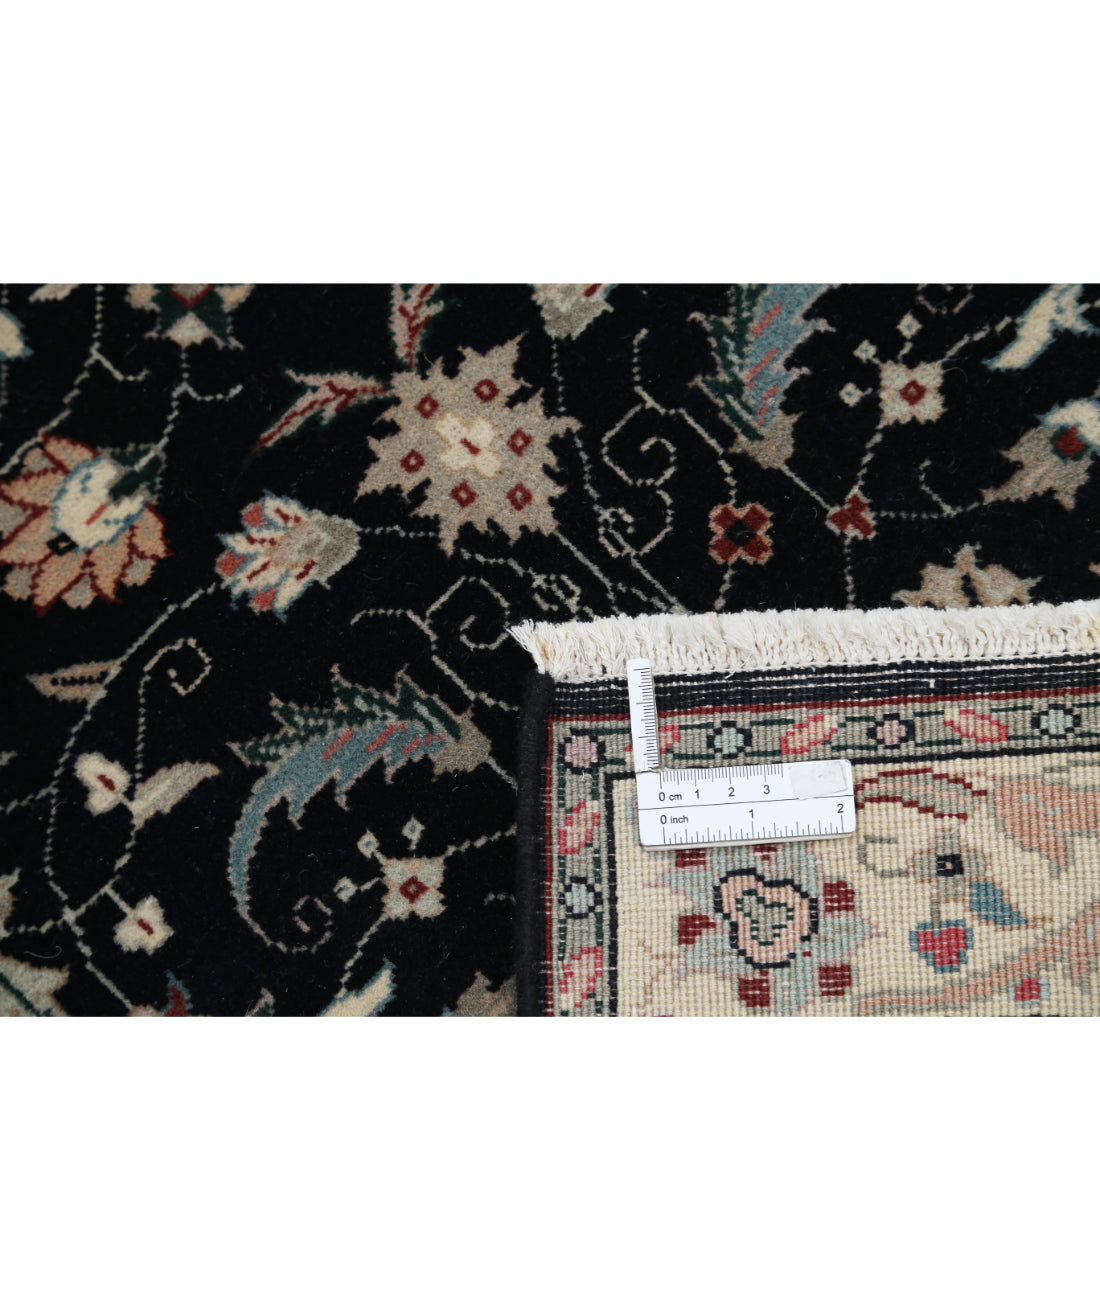 Heritage 2' 6" X 11' 10" Hand-Knotted Wool Rug 2' 6" X 11' 10" (76 X 361) / Black / Ivory